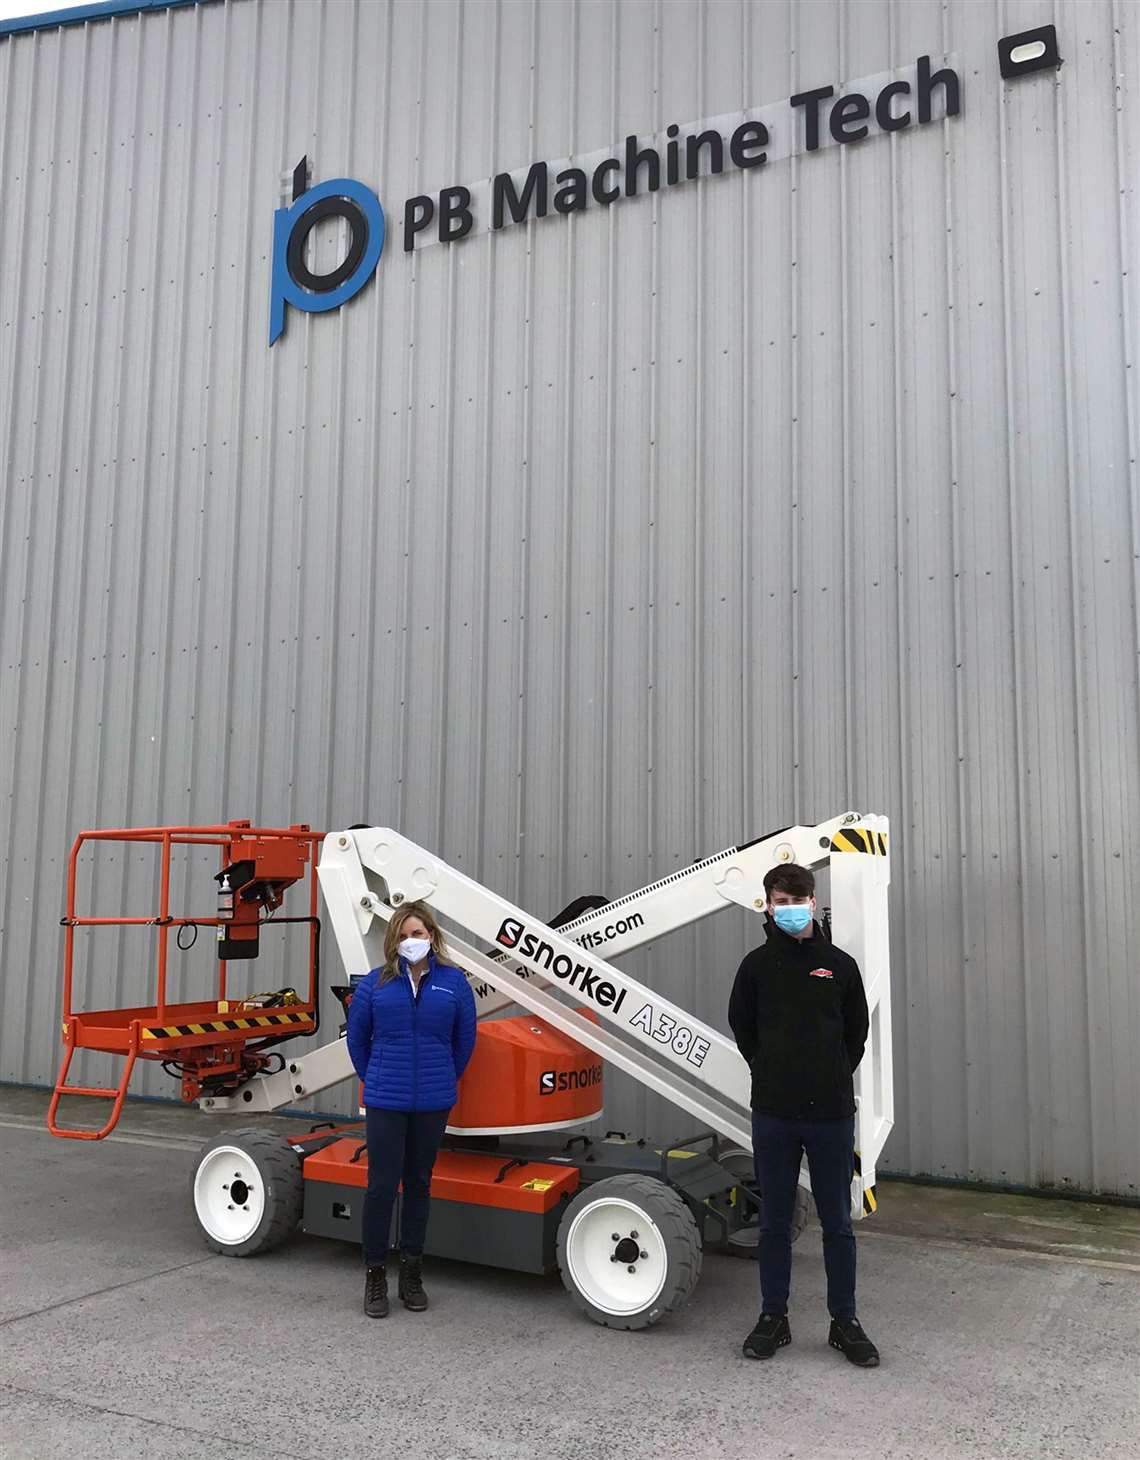 PB Machine Tech's managing director Lily Holmes receives the Snorkel A38E from Sean Hopkins, field sales representative, Ahern Ireland